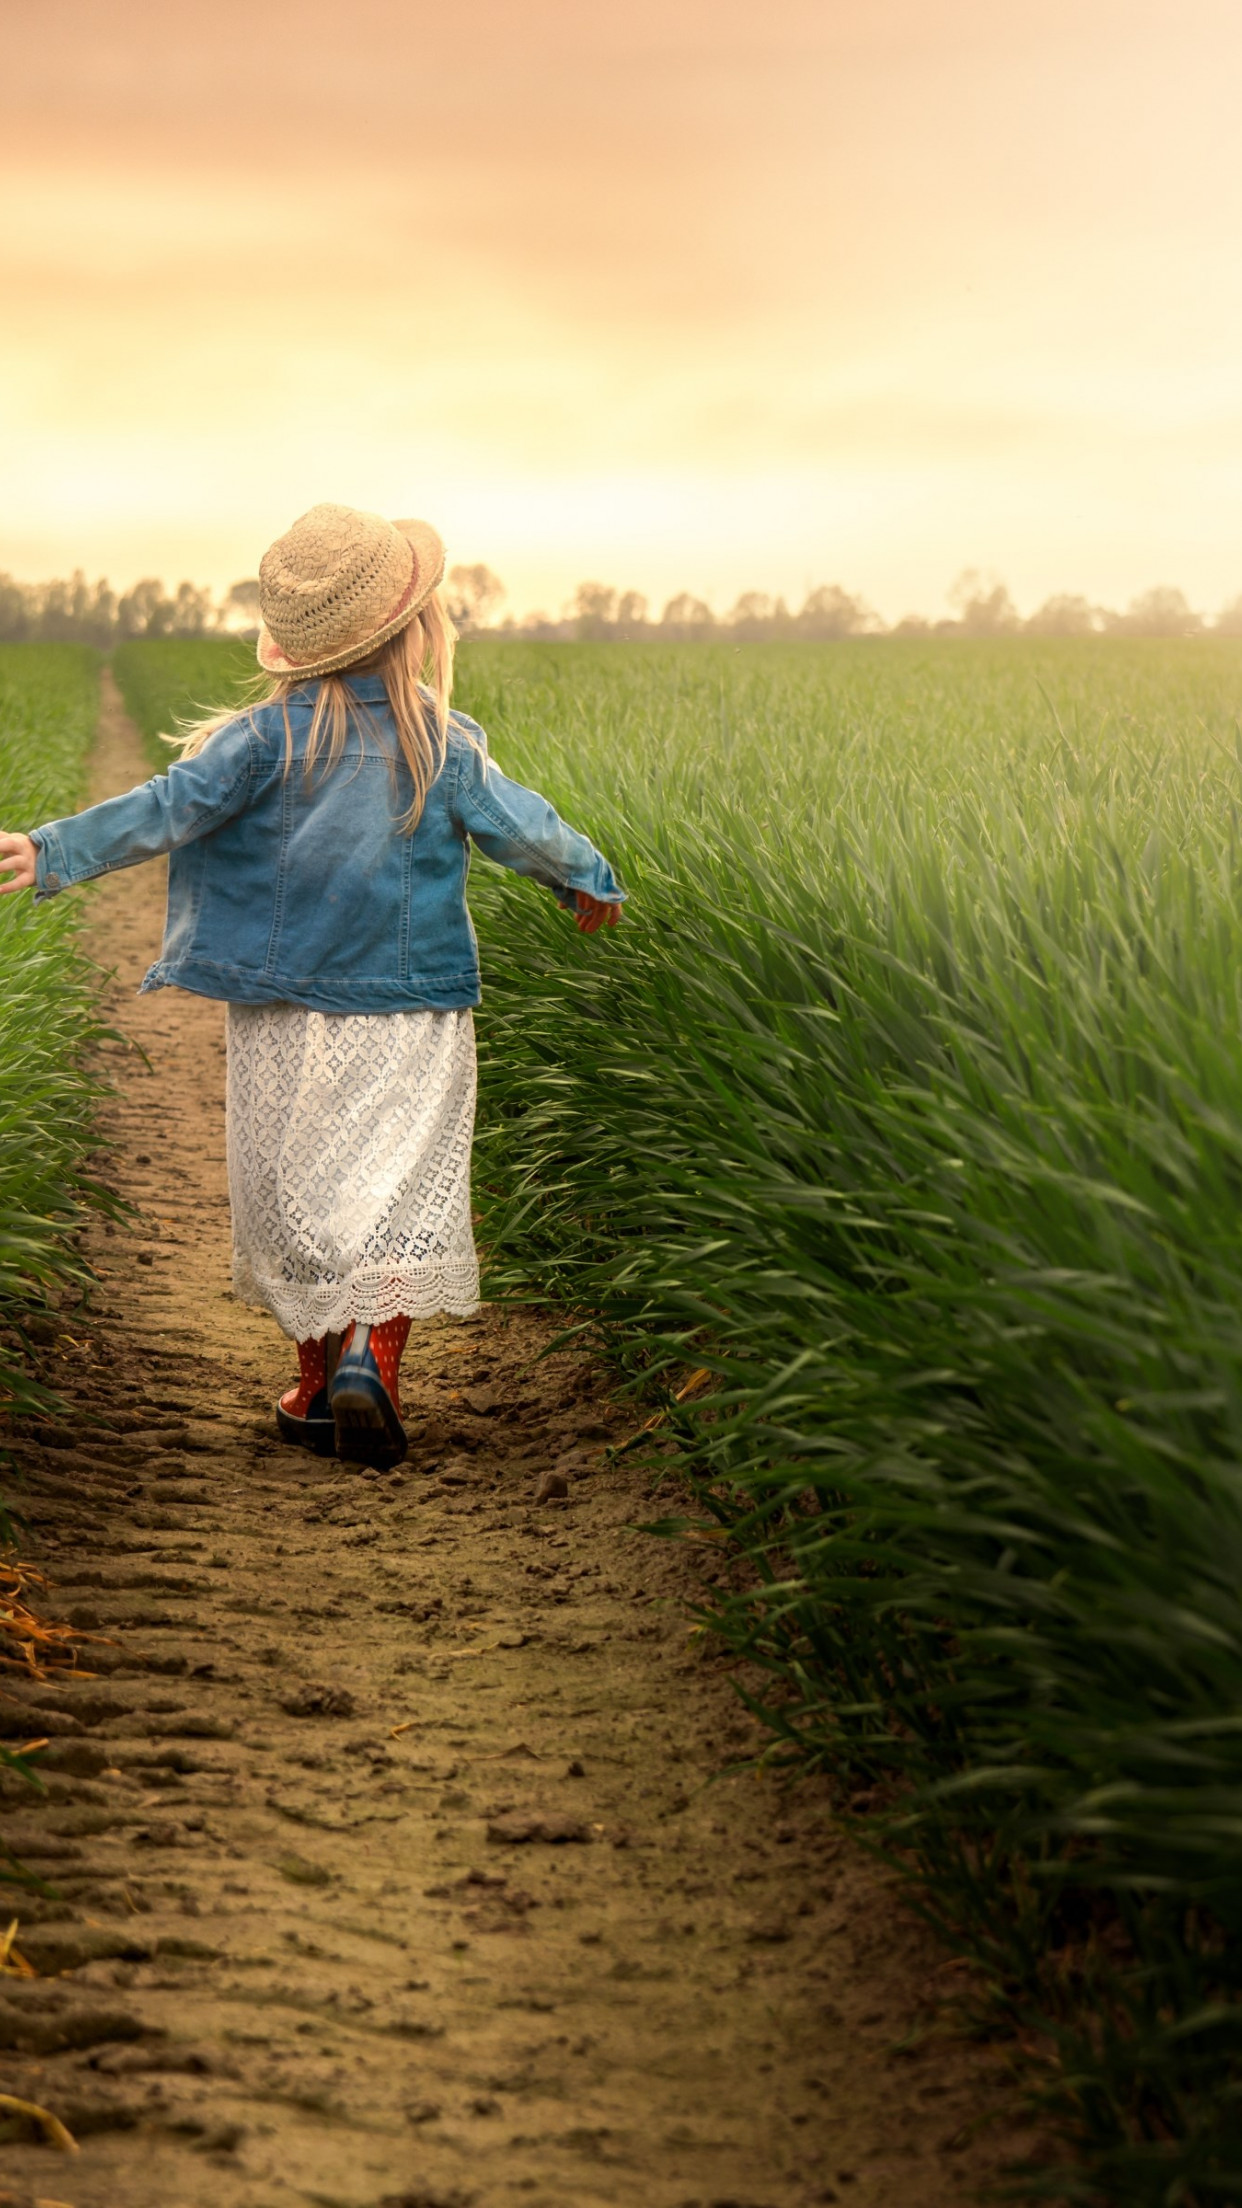 Child in the green field at sunset wallpaper 1242x2208